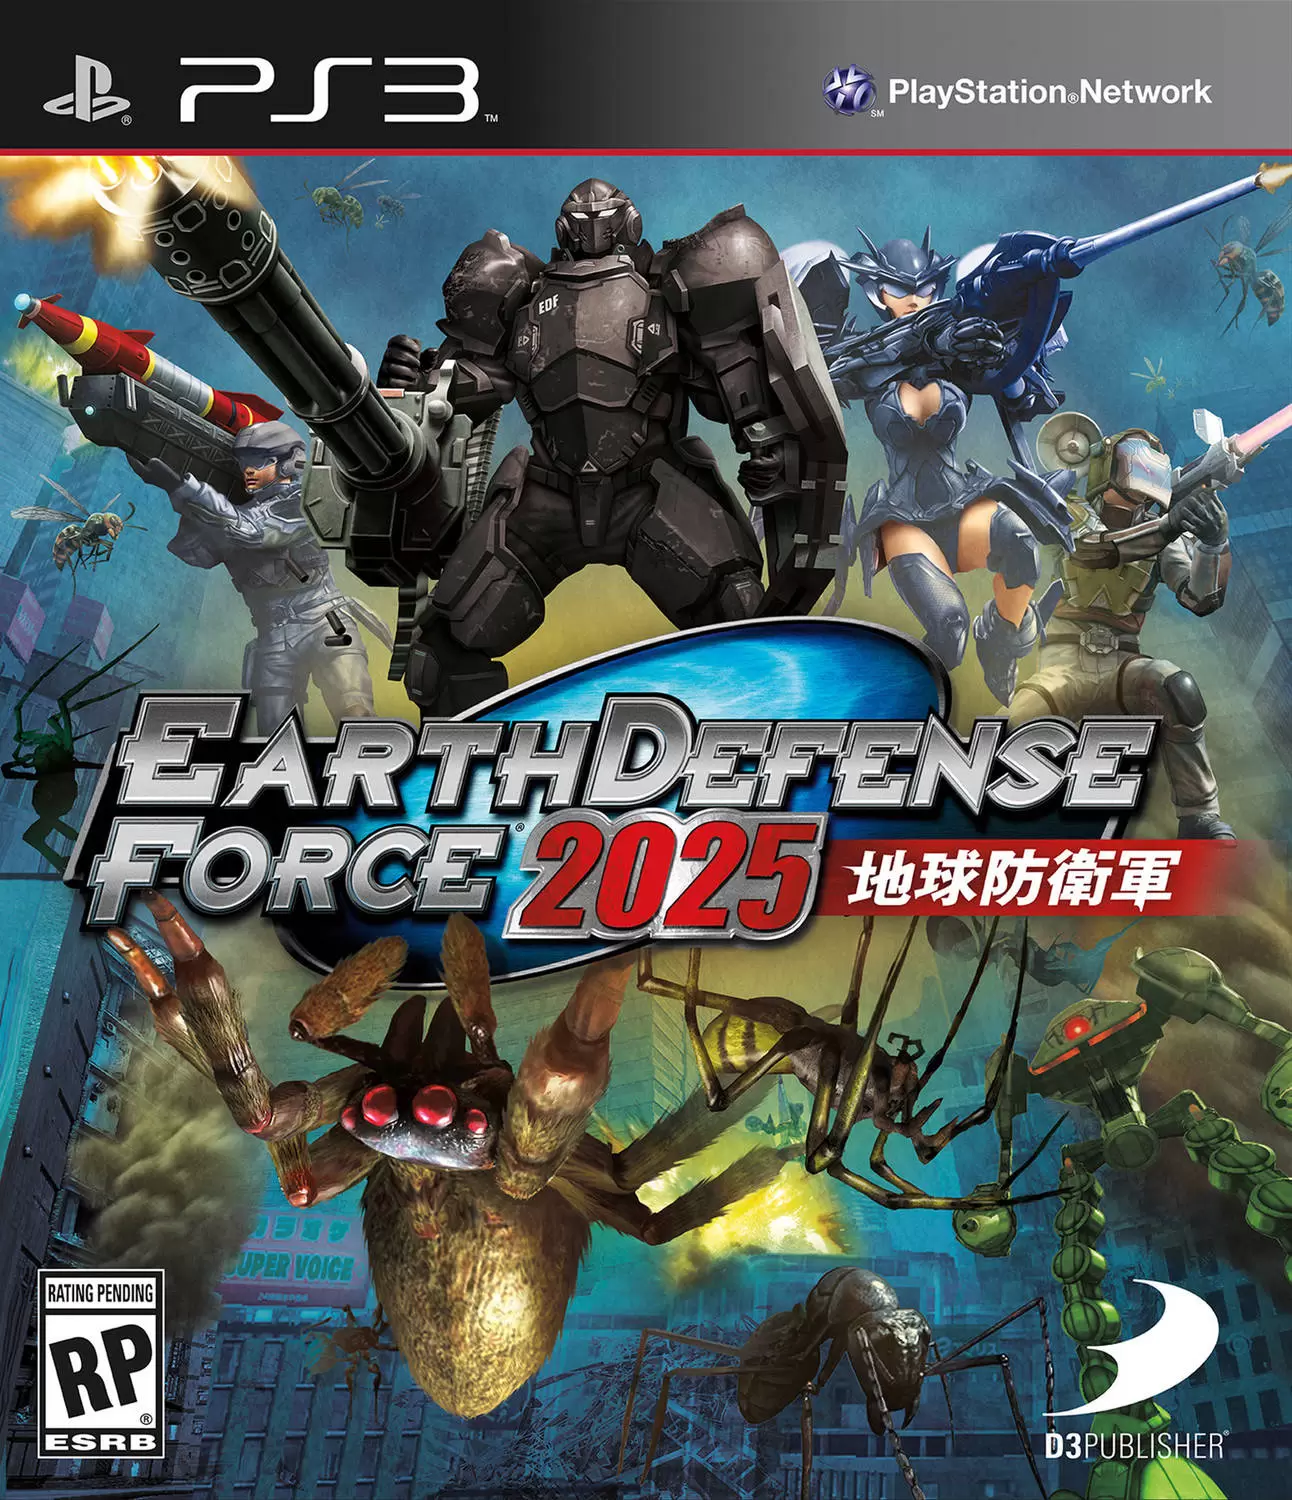 PS3 Games - Earth Defense Force 2025